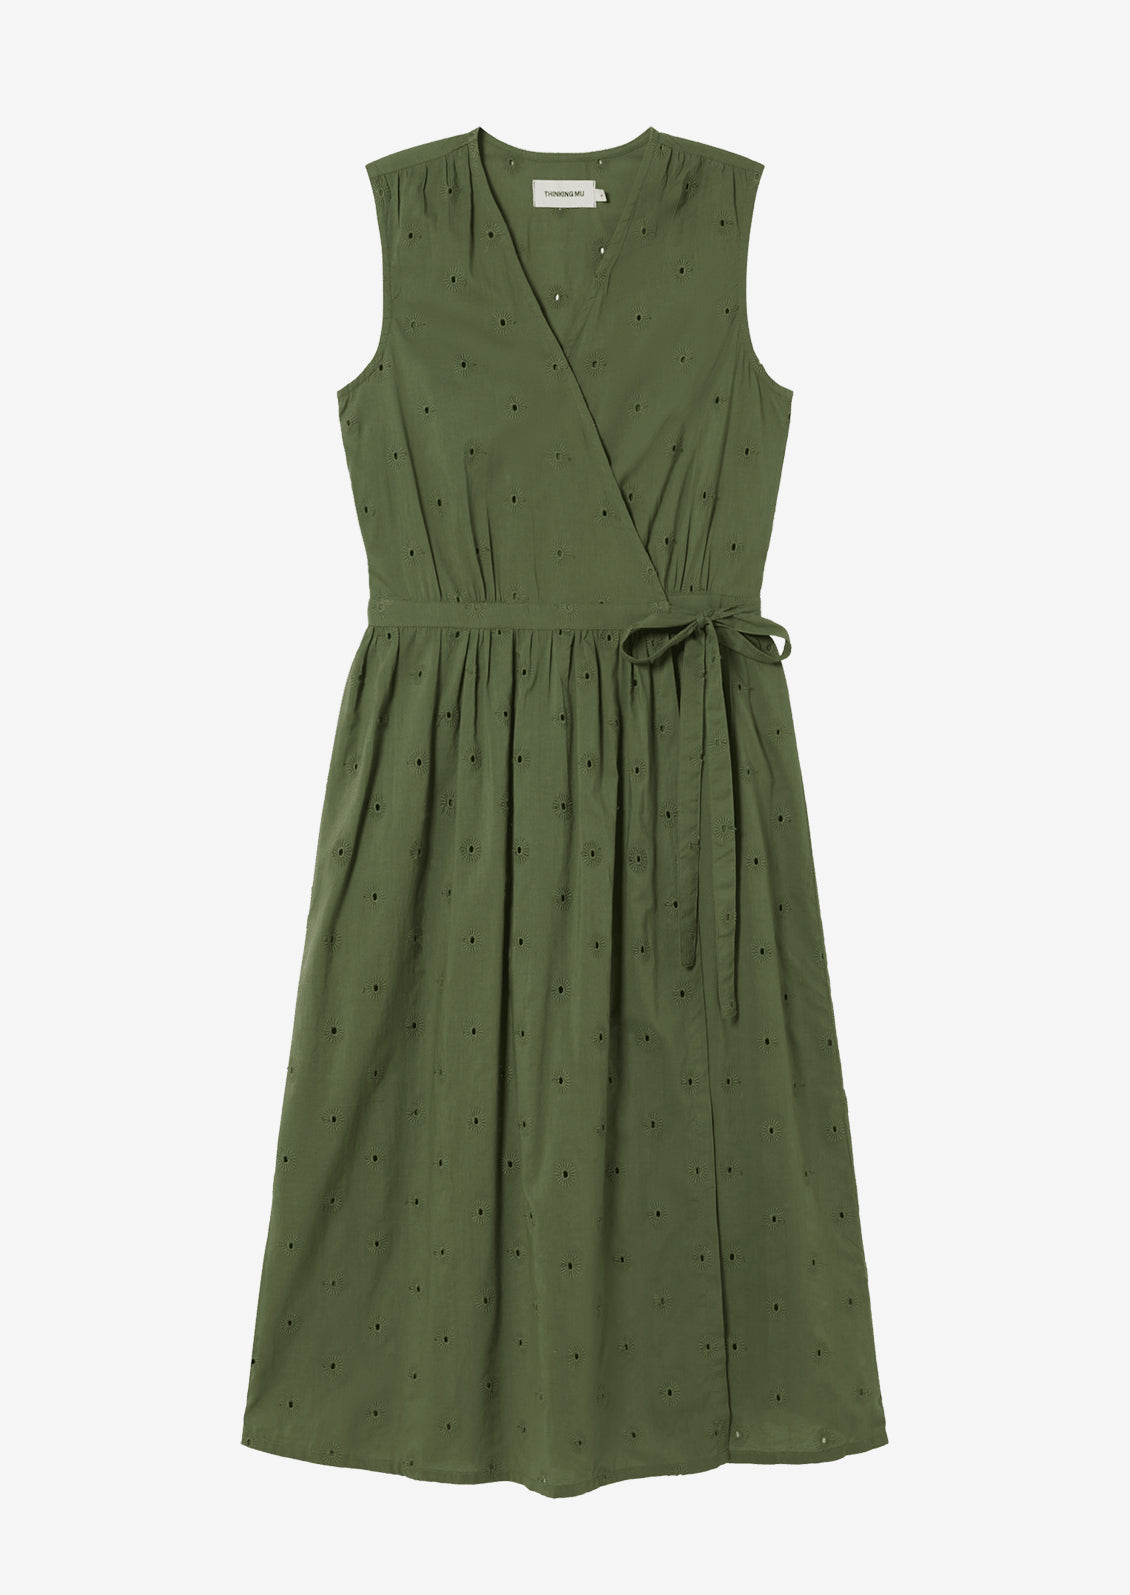 Green cotton dress with tie closure and sun-shaped eyelet embroidery.